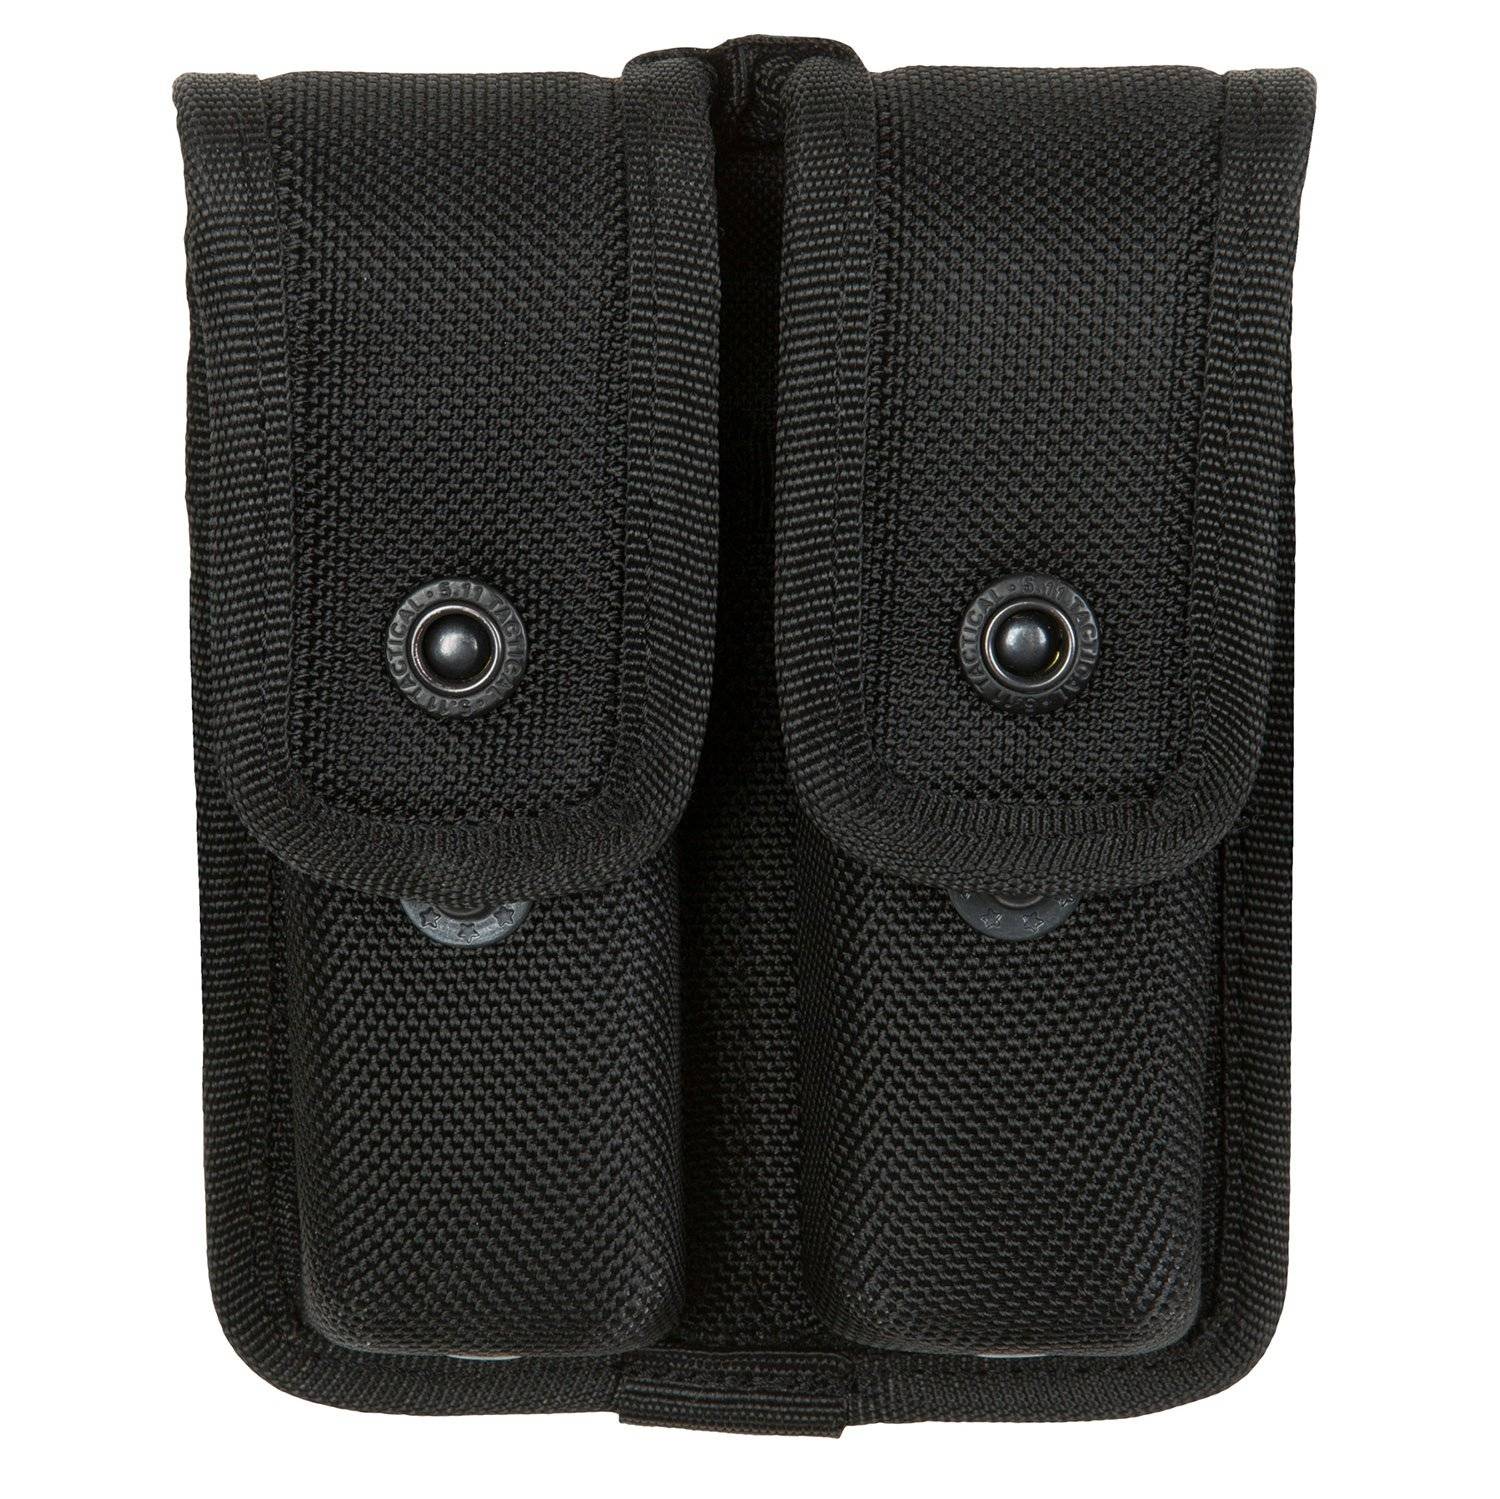 5.11 Tactical Sierra Double Mag Pouch